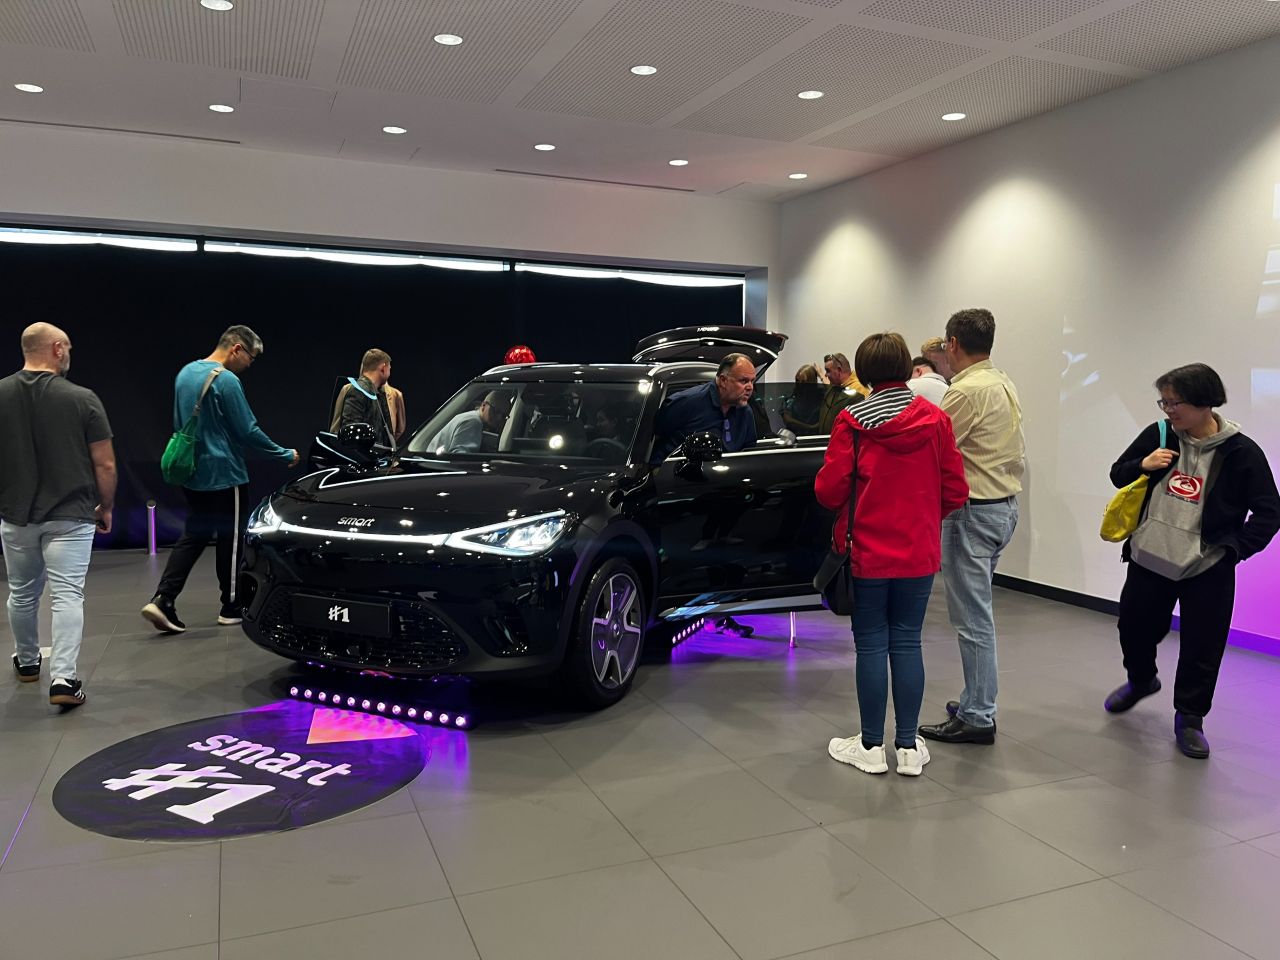 LSH Auto UK unveils the smart #1 at Mercedes-Benz of Stockport launch event